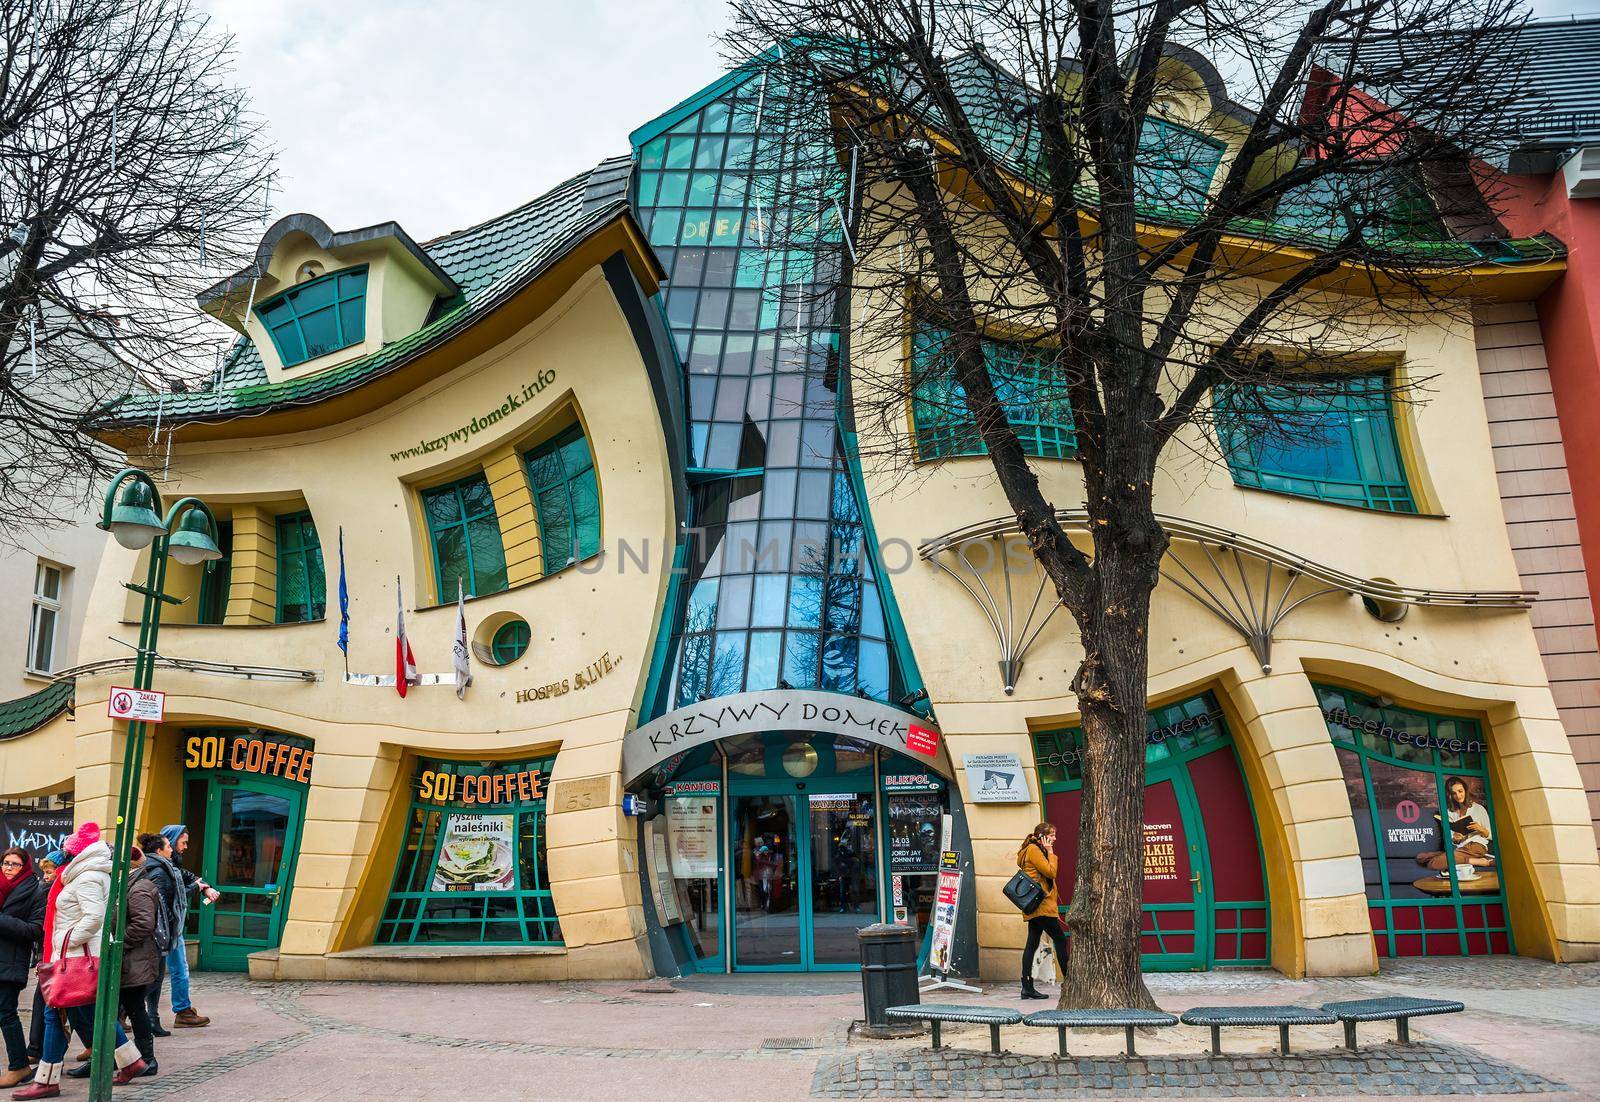 Sopot, Poland -MARCH 14: The Crooked House on the main street of Monte Cassino in Sopot Poland on March 14, 2015